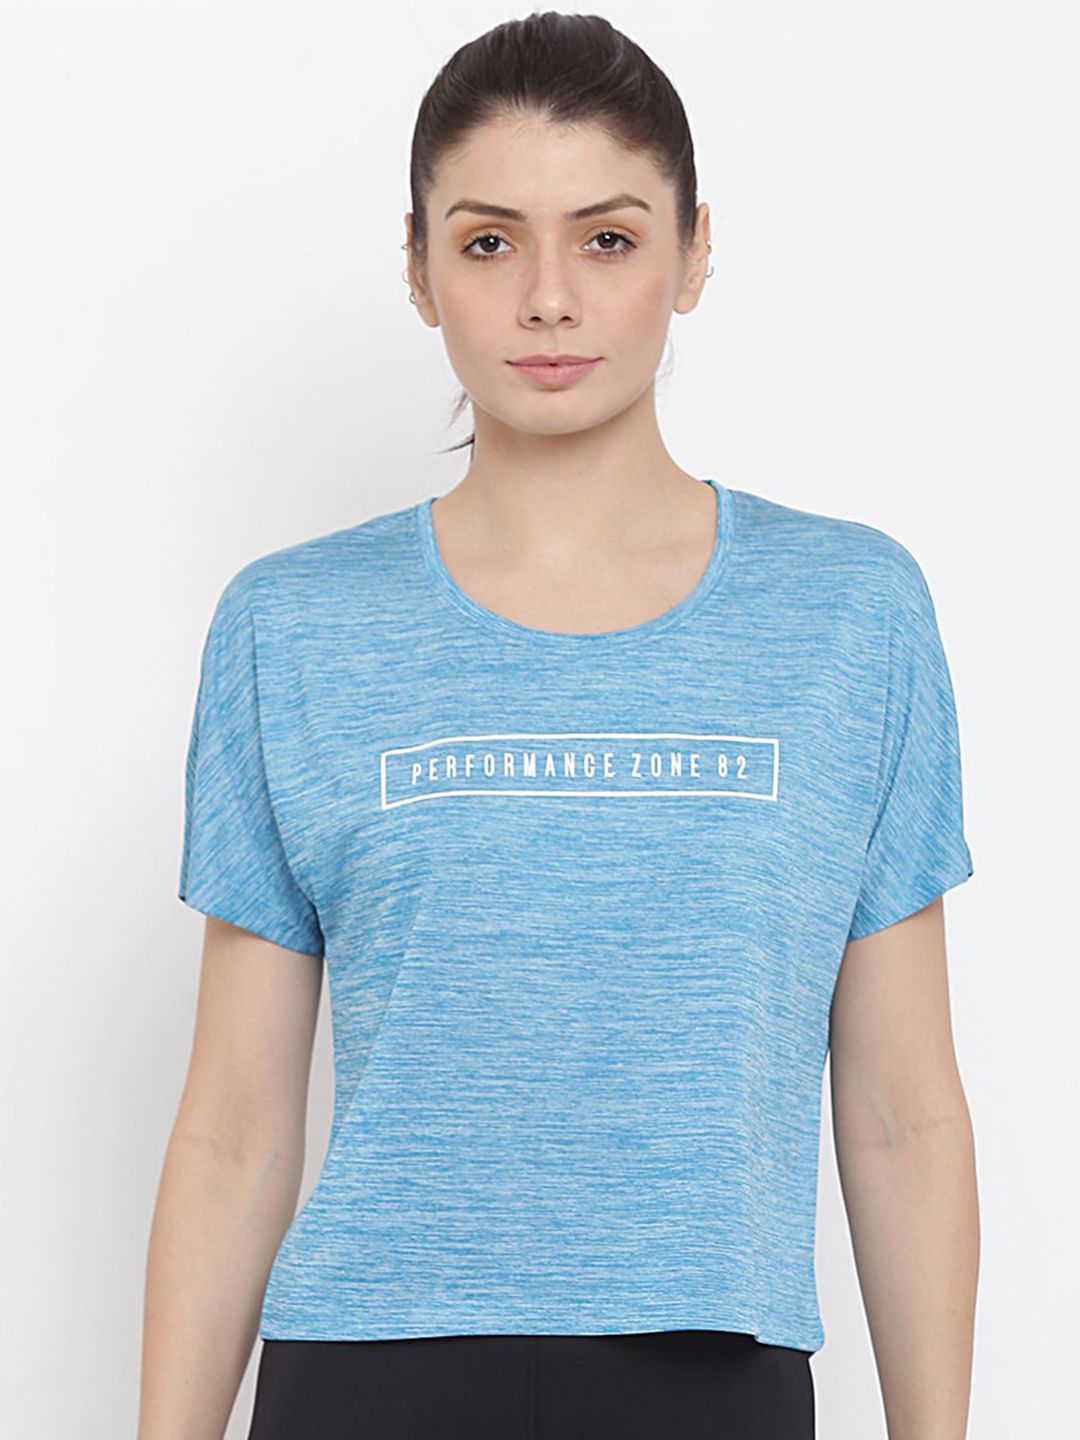 MKH Women Blue Typography Printed Dri-FIT T-shirt Price in India